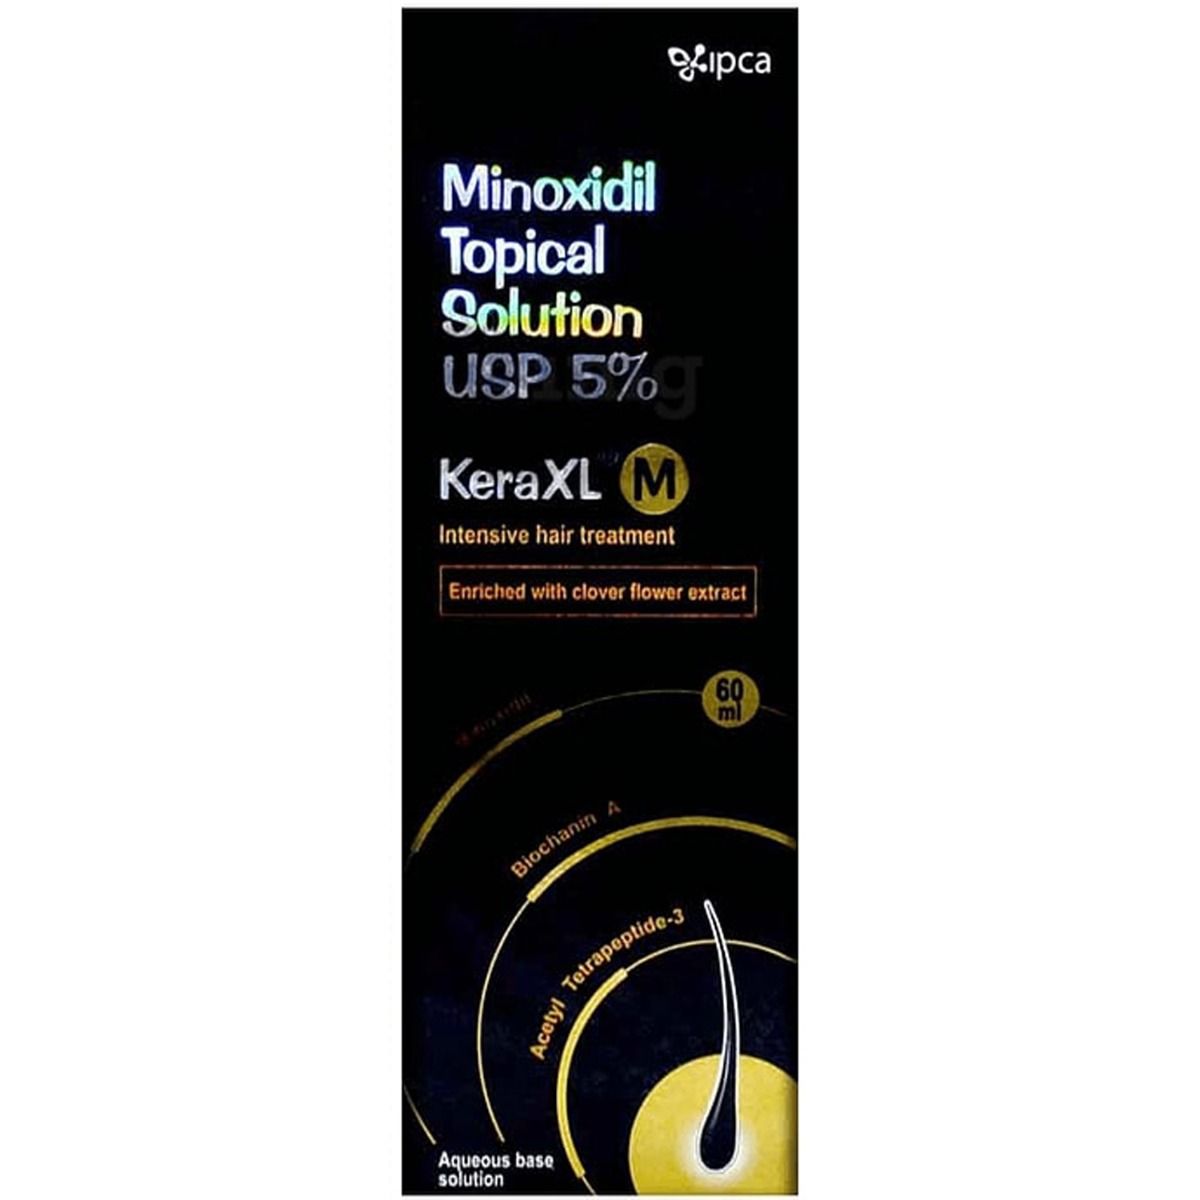 Kera XL M Solution 60 ml Price, Uses, Side Effects, Composition - Apollo  Pharmacy